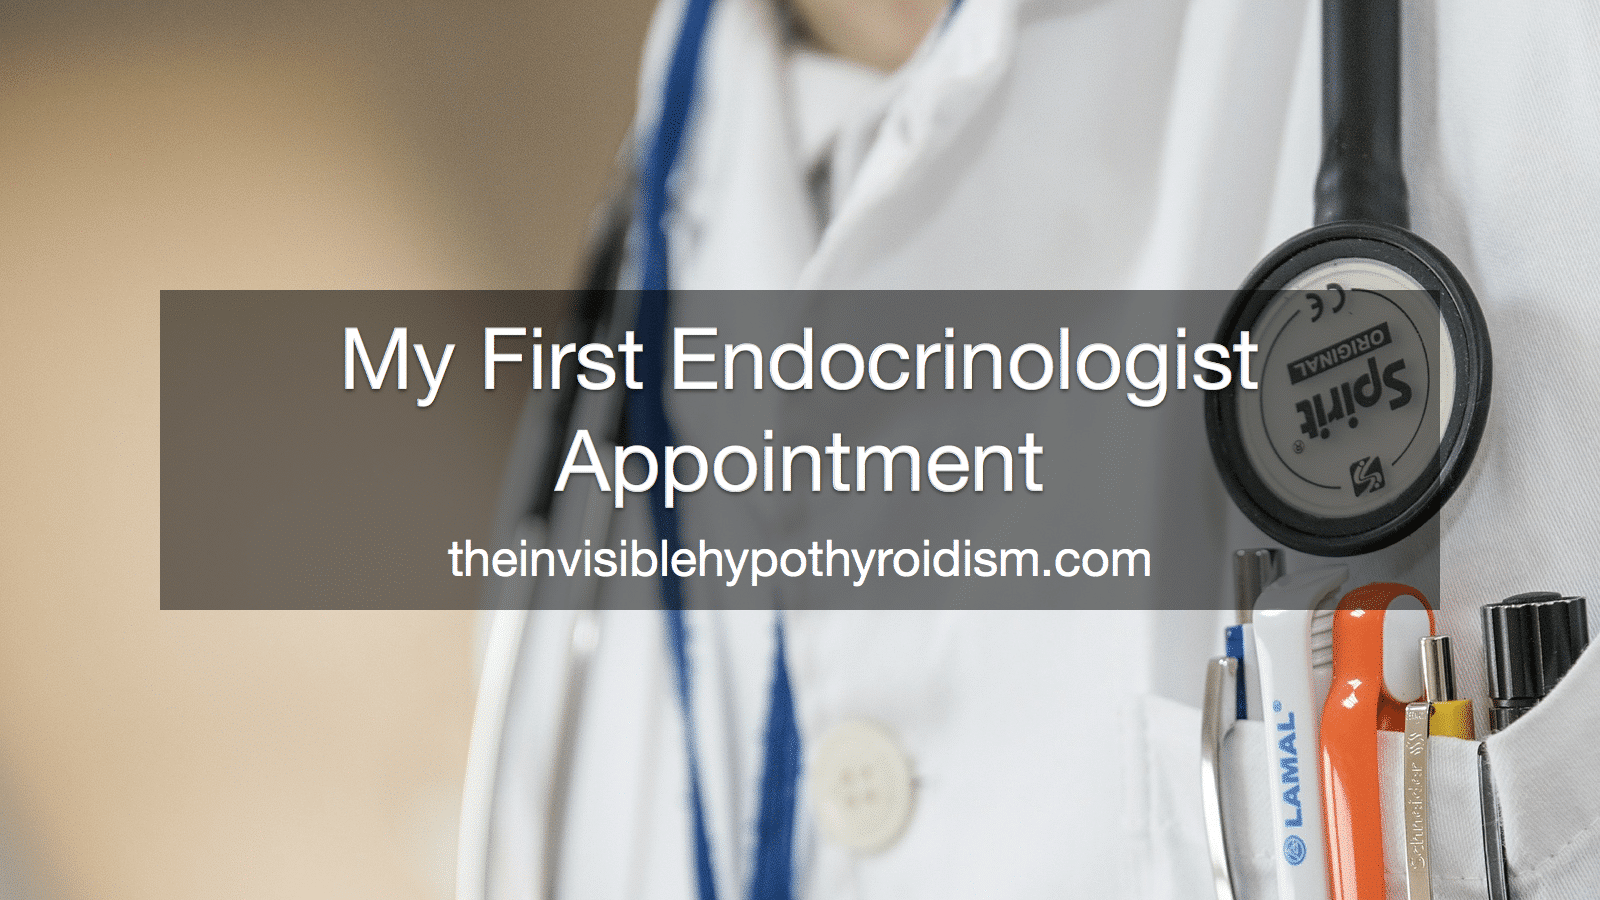 My First Endocrinologist Appointment